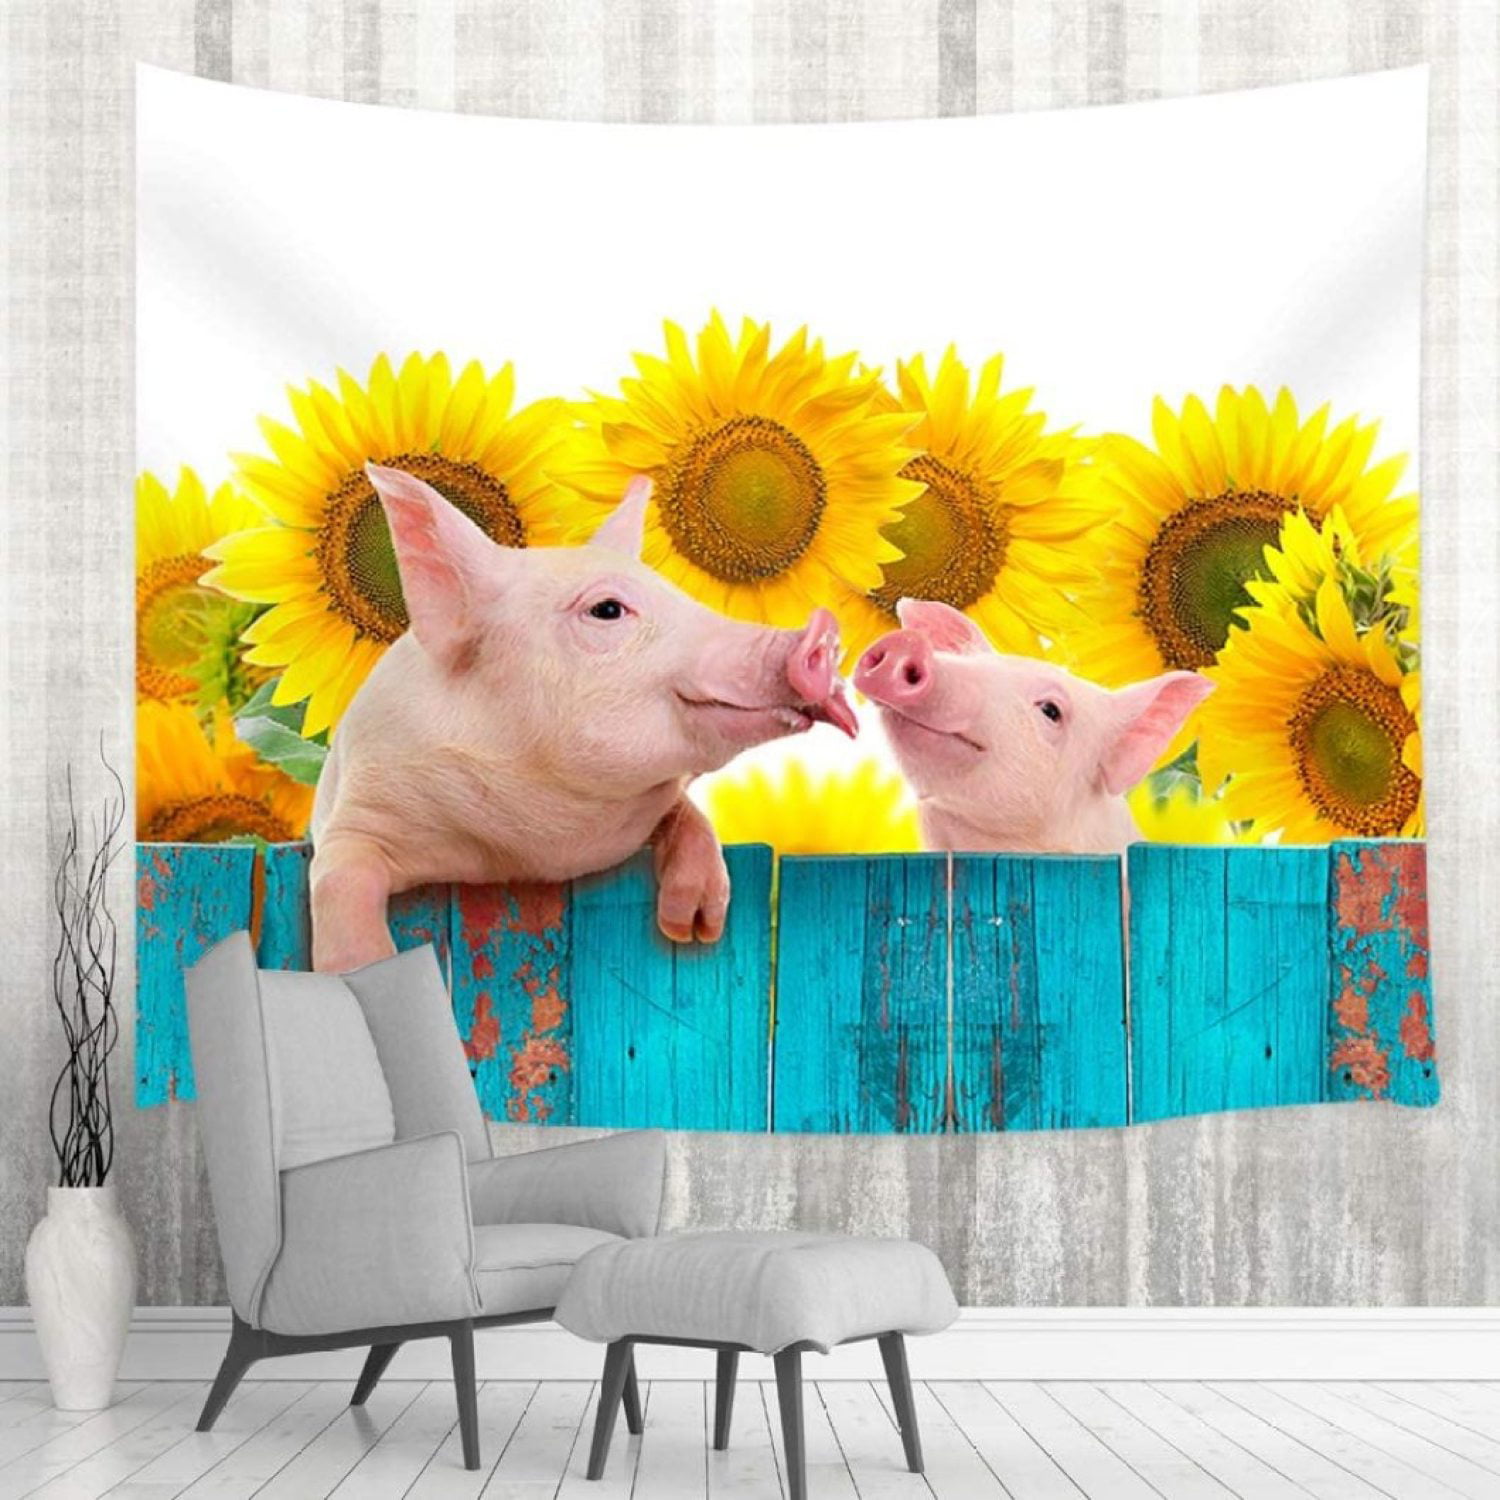 Rustic Country Farmhouse Animals Plant Flowers Tapestry Wall Hanging, Funny  Pig on Rustic Turquoise Wooden Fence with Sunflowers Tapestry Art Home  Decor for Bedroom Living Room College Dorm,60X40in 